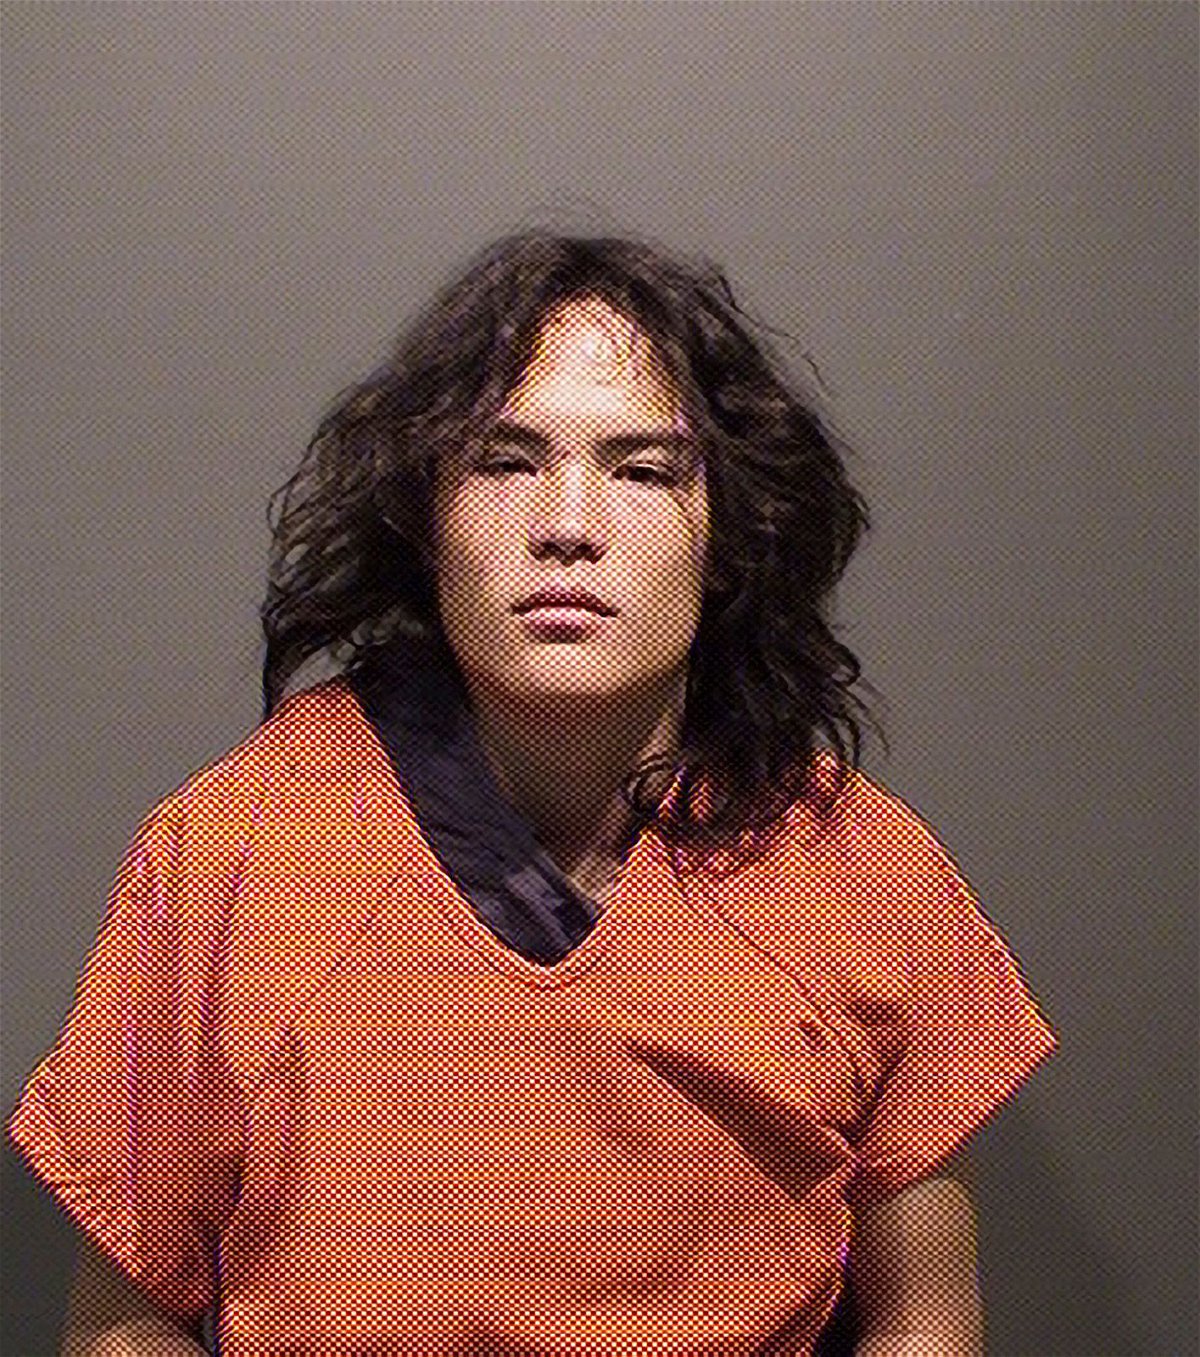 <i>Jefferson County Sheriff's Office via CNN Newsource</i><br />This photo provided by the Jefferson County Sheriff's Office shows Zachary Kwak.